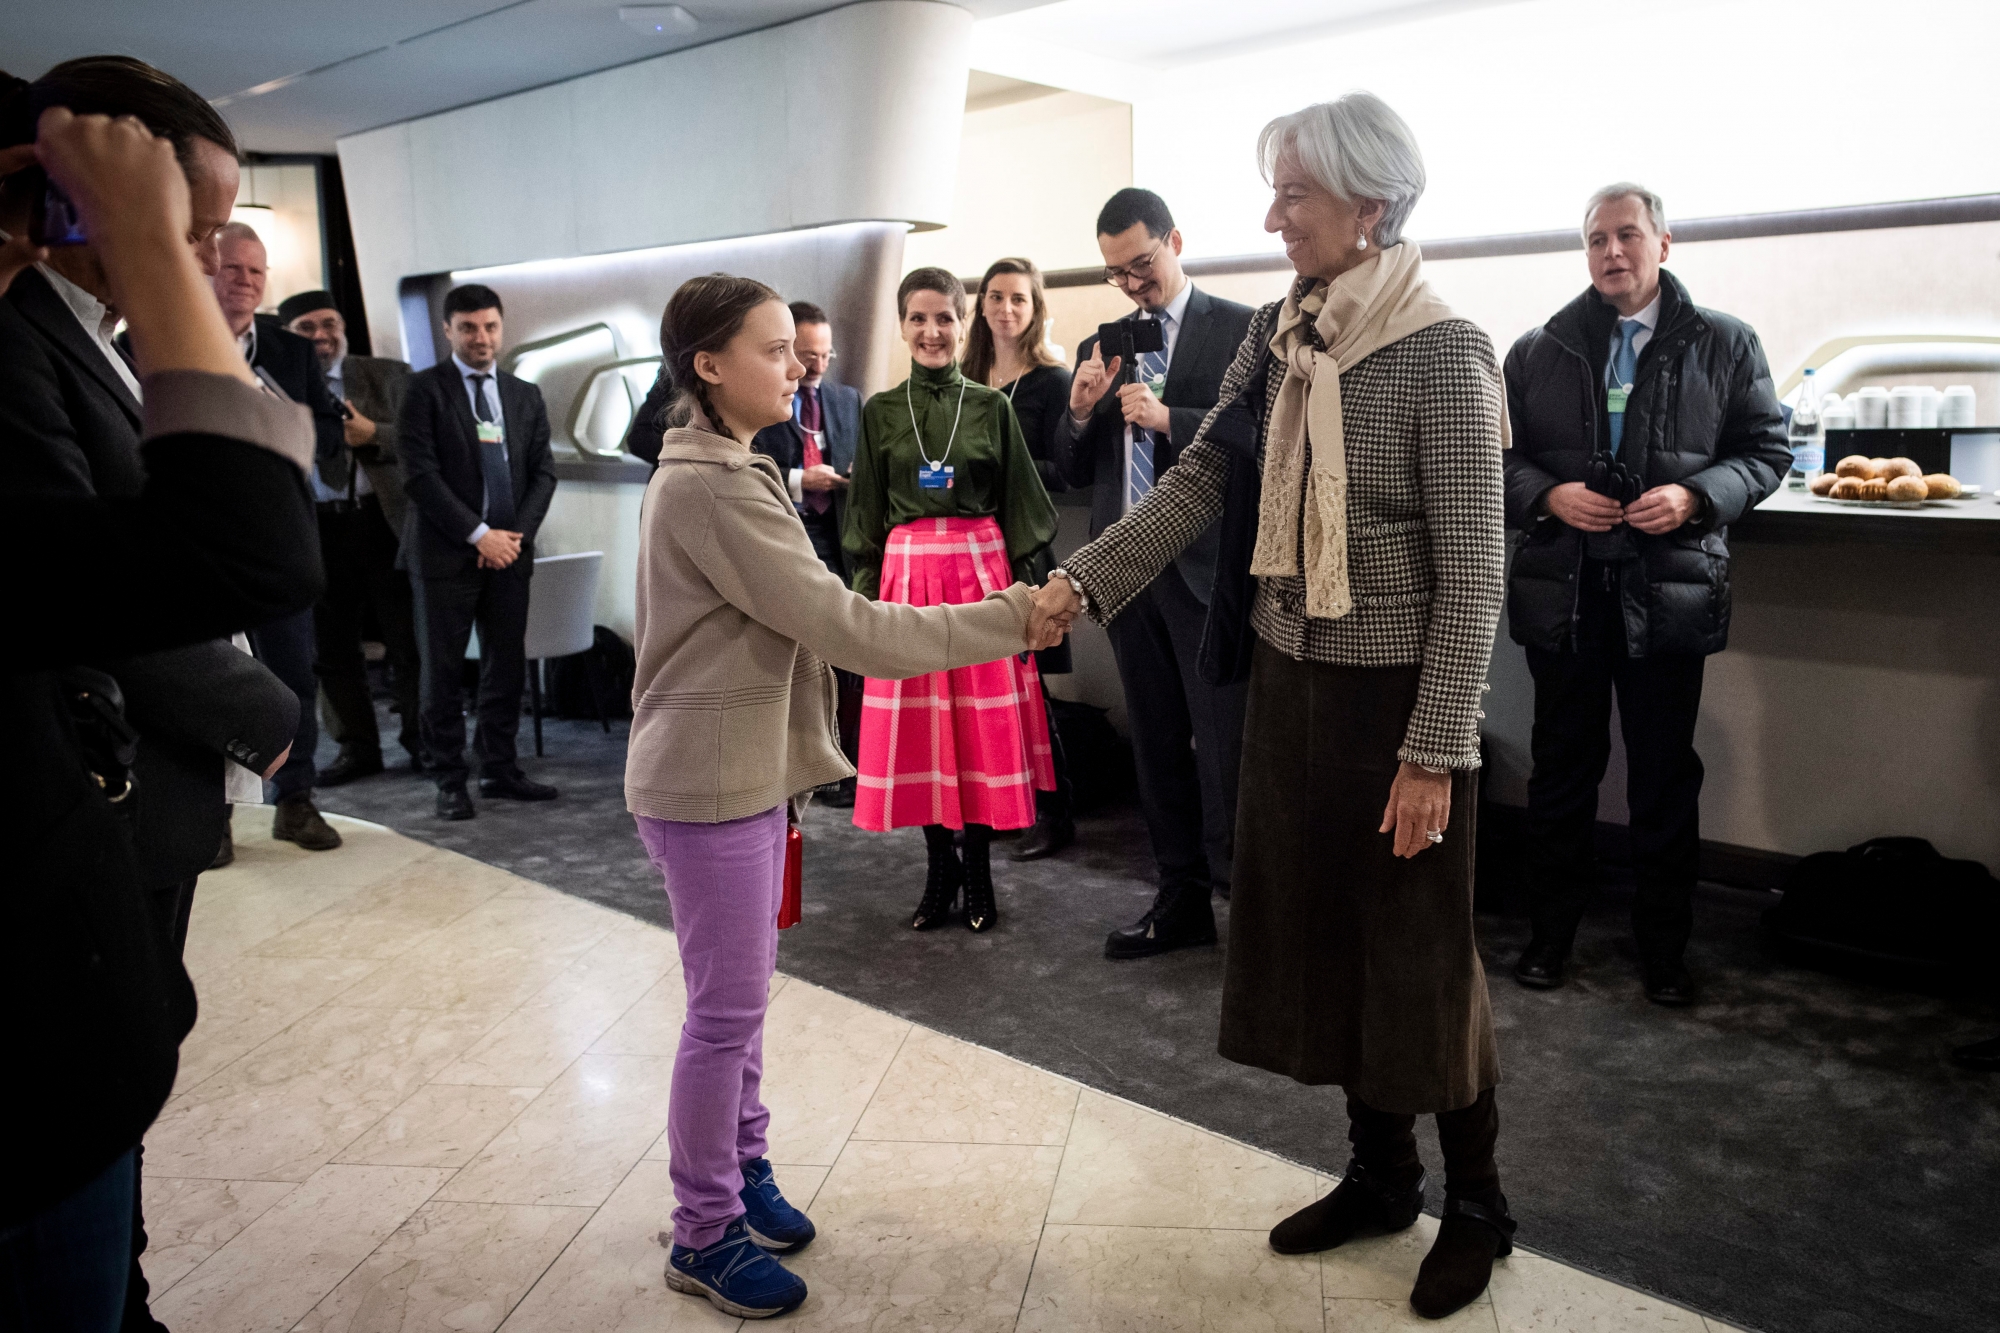 16 year old Swedish climate activist Greta Thunberg, left, meets with France's Christine Lagarde, Managing Director of the International Monetary Fund, right, during the 49th annual meeting of the World Economic Forum, WEF, in Davos, Switzerland, Friday, January 25, 2019. The meeting brings together entrepreneurs, scientists, corporate and political leaders in Davos under the topic ÄúGlobalization 4.0Äù from 22 - 25 January 2019. (KEYSTONE/Gian Ehrenzeller) SWITZERLAND WORLD ECONOMIC FORUM WEF